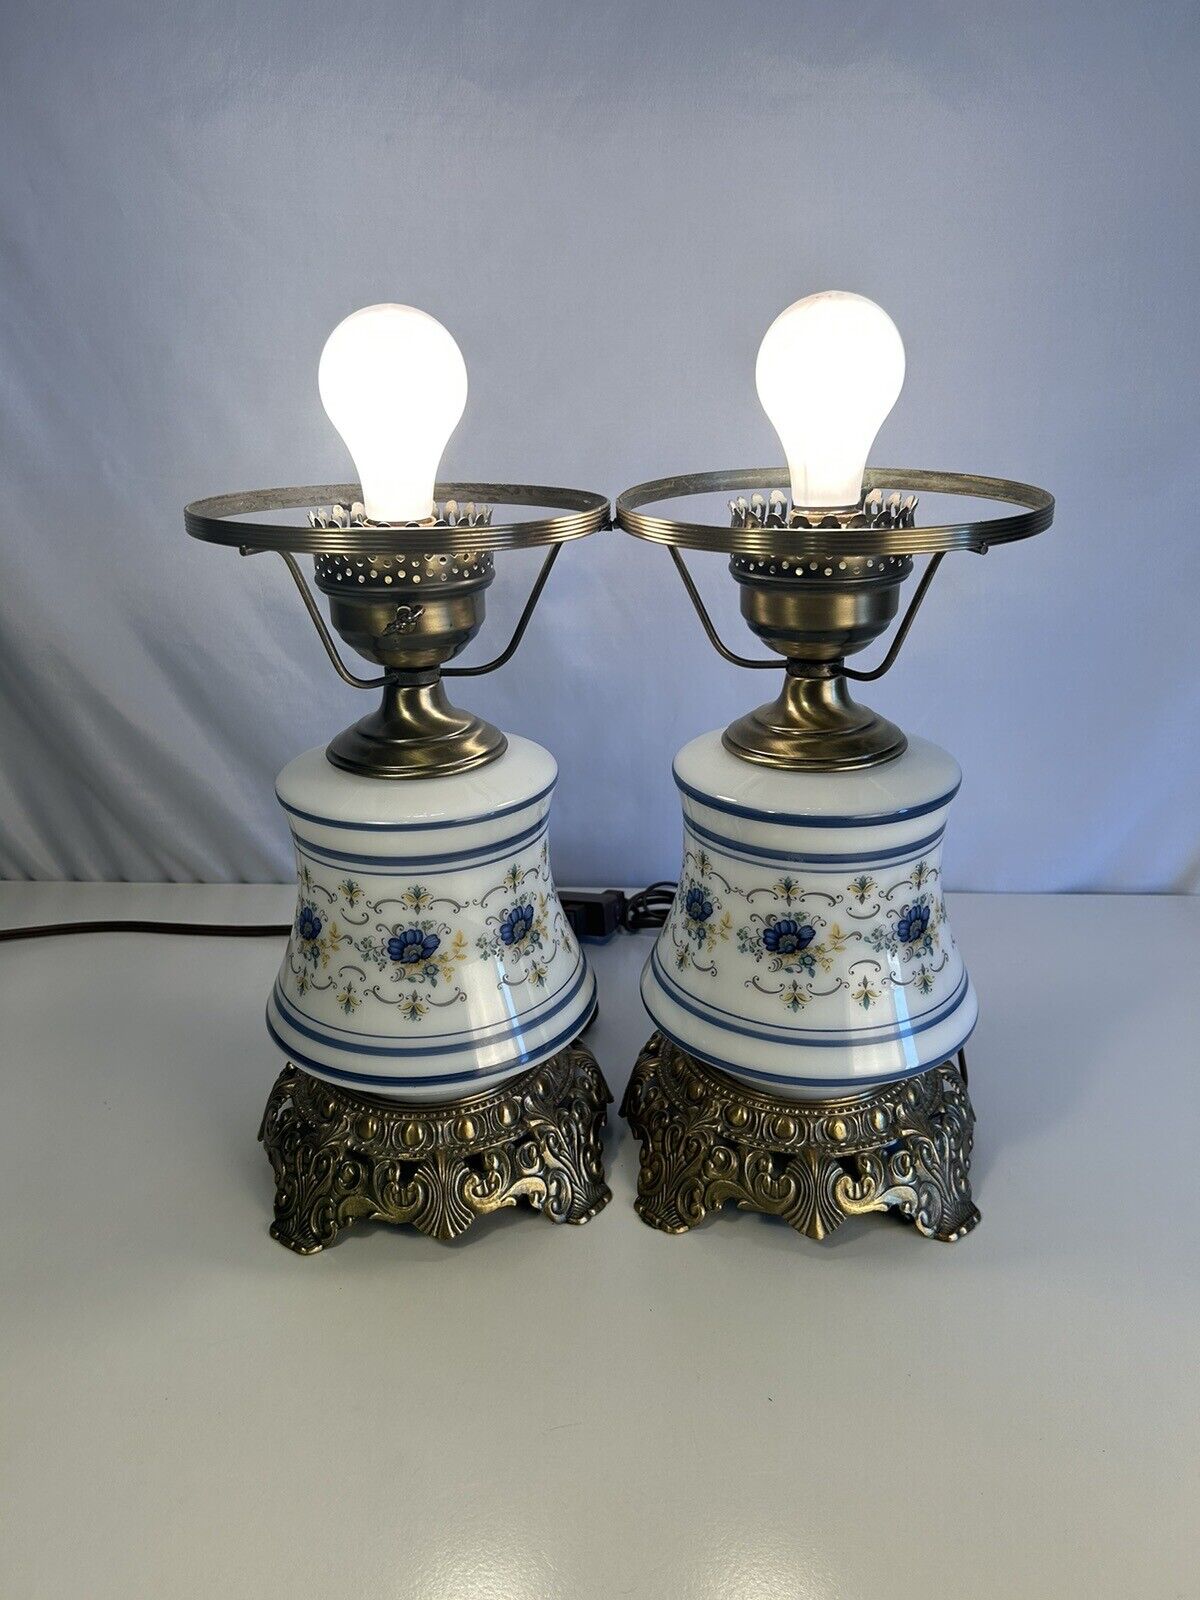 Large 1973 Abigail Adams Hurricane 3 Way Lamp Bases Only - uses 7” fitter Shade